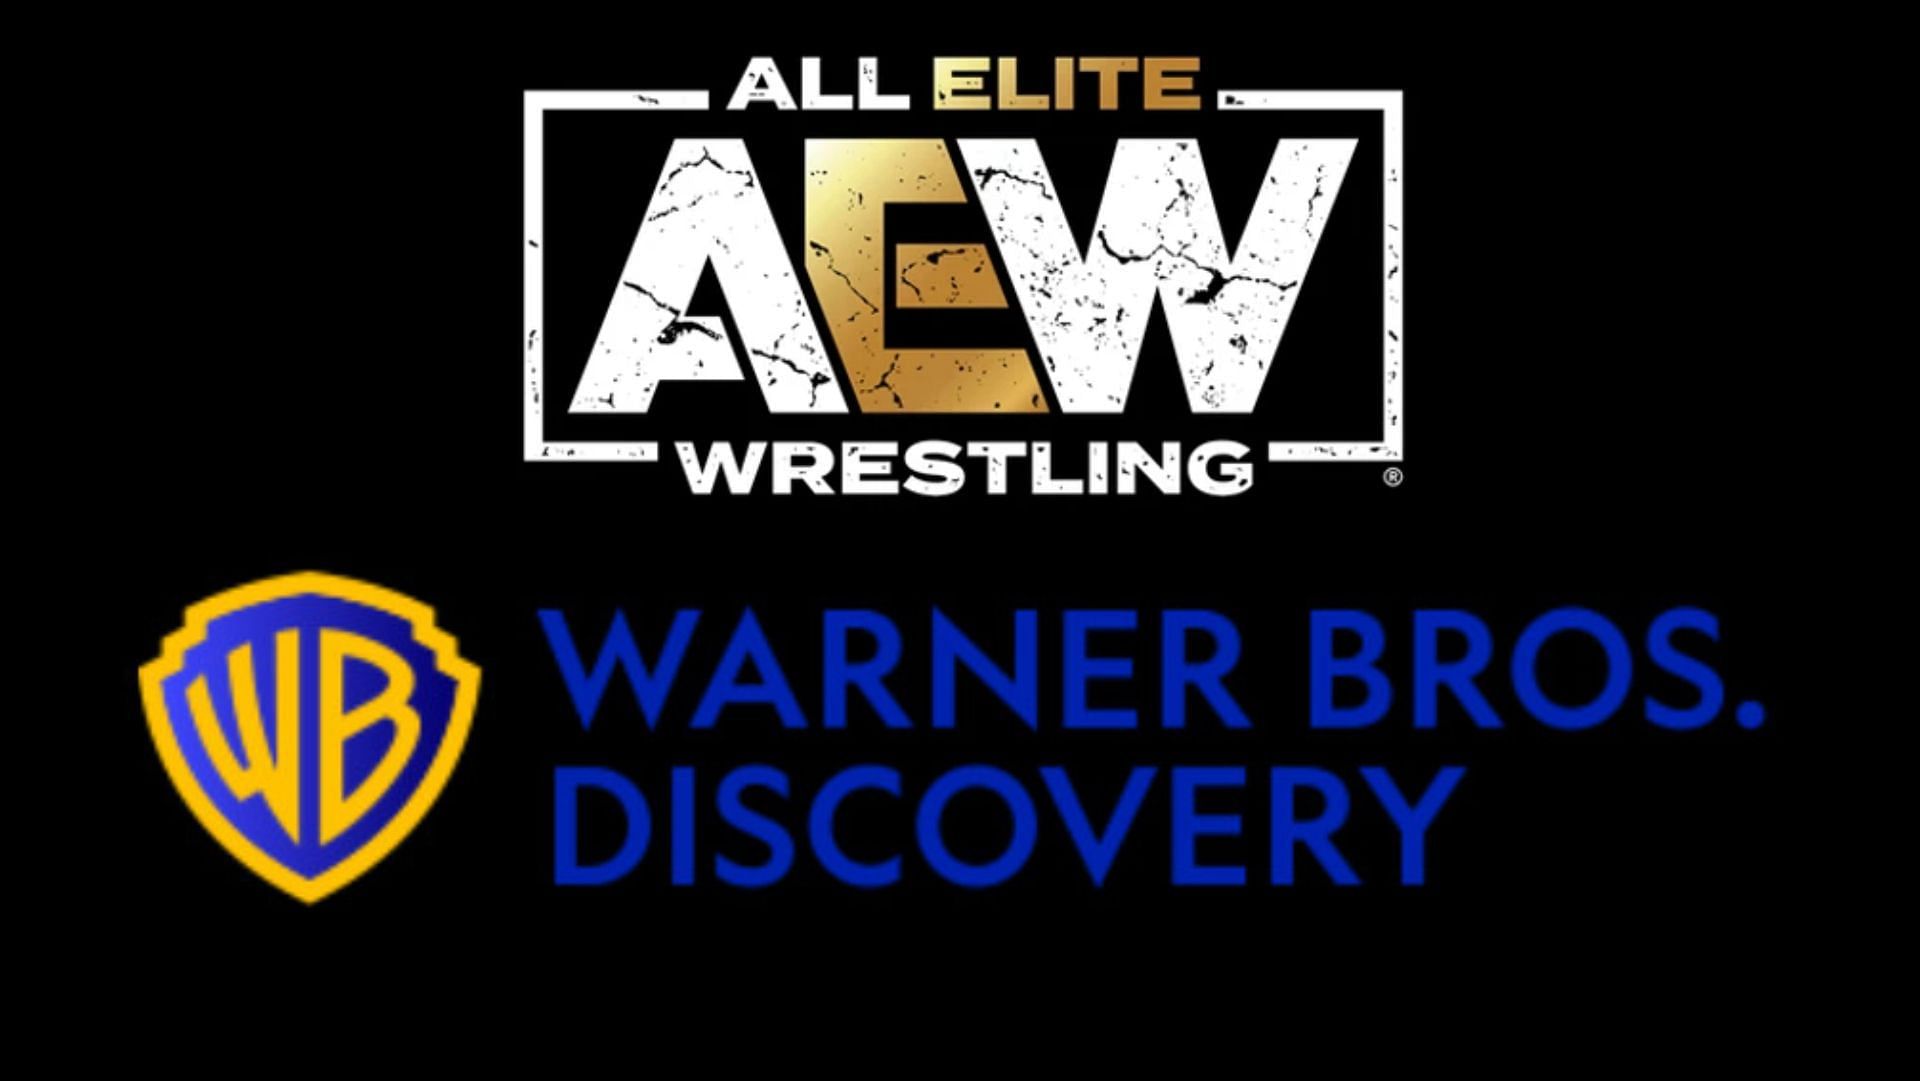 An AEW show is at risk of being cancelled by Warner Bros Discovery